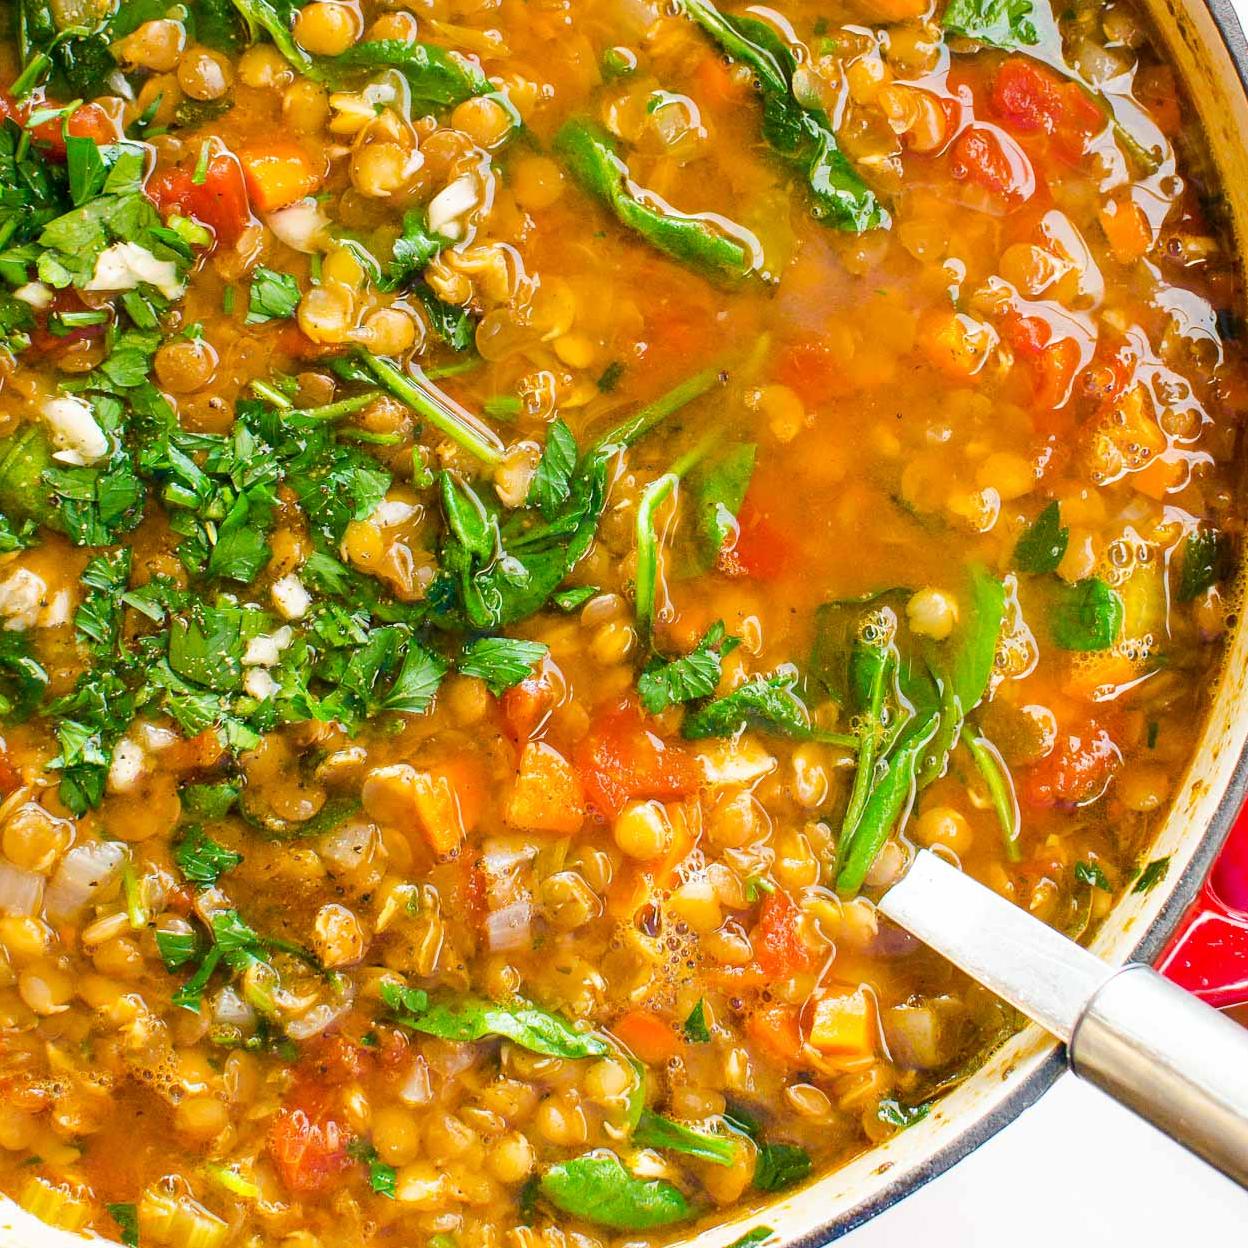  This soup is loaded with protein, fiber, and flavor!